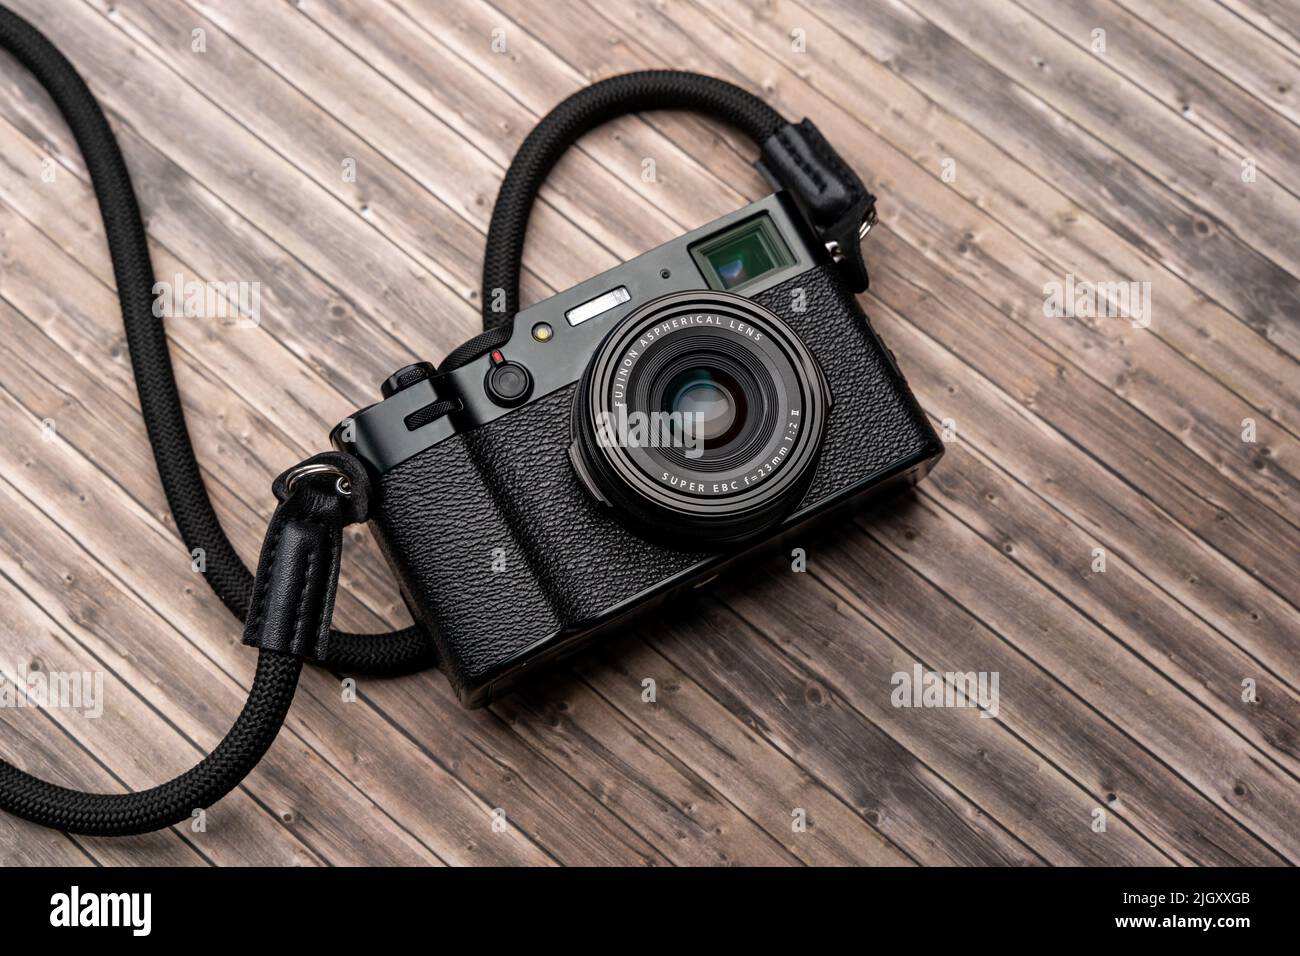 Fujifilm X100V compact camera with a fixed 23 mm Fujinon prime lens. Vintage design photo camera for creative people and photographers. Easy to use. Stock Photo